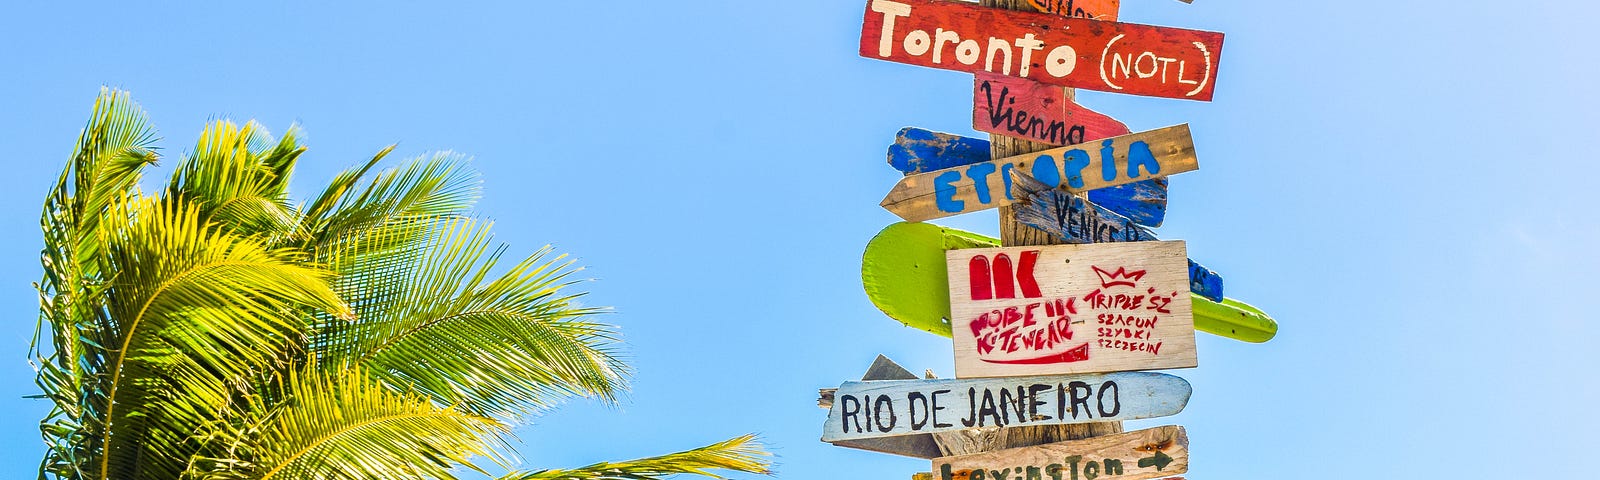 A road sign pointing to cities far and wide with a palm tree in the background.